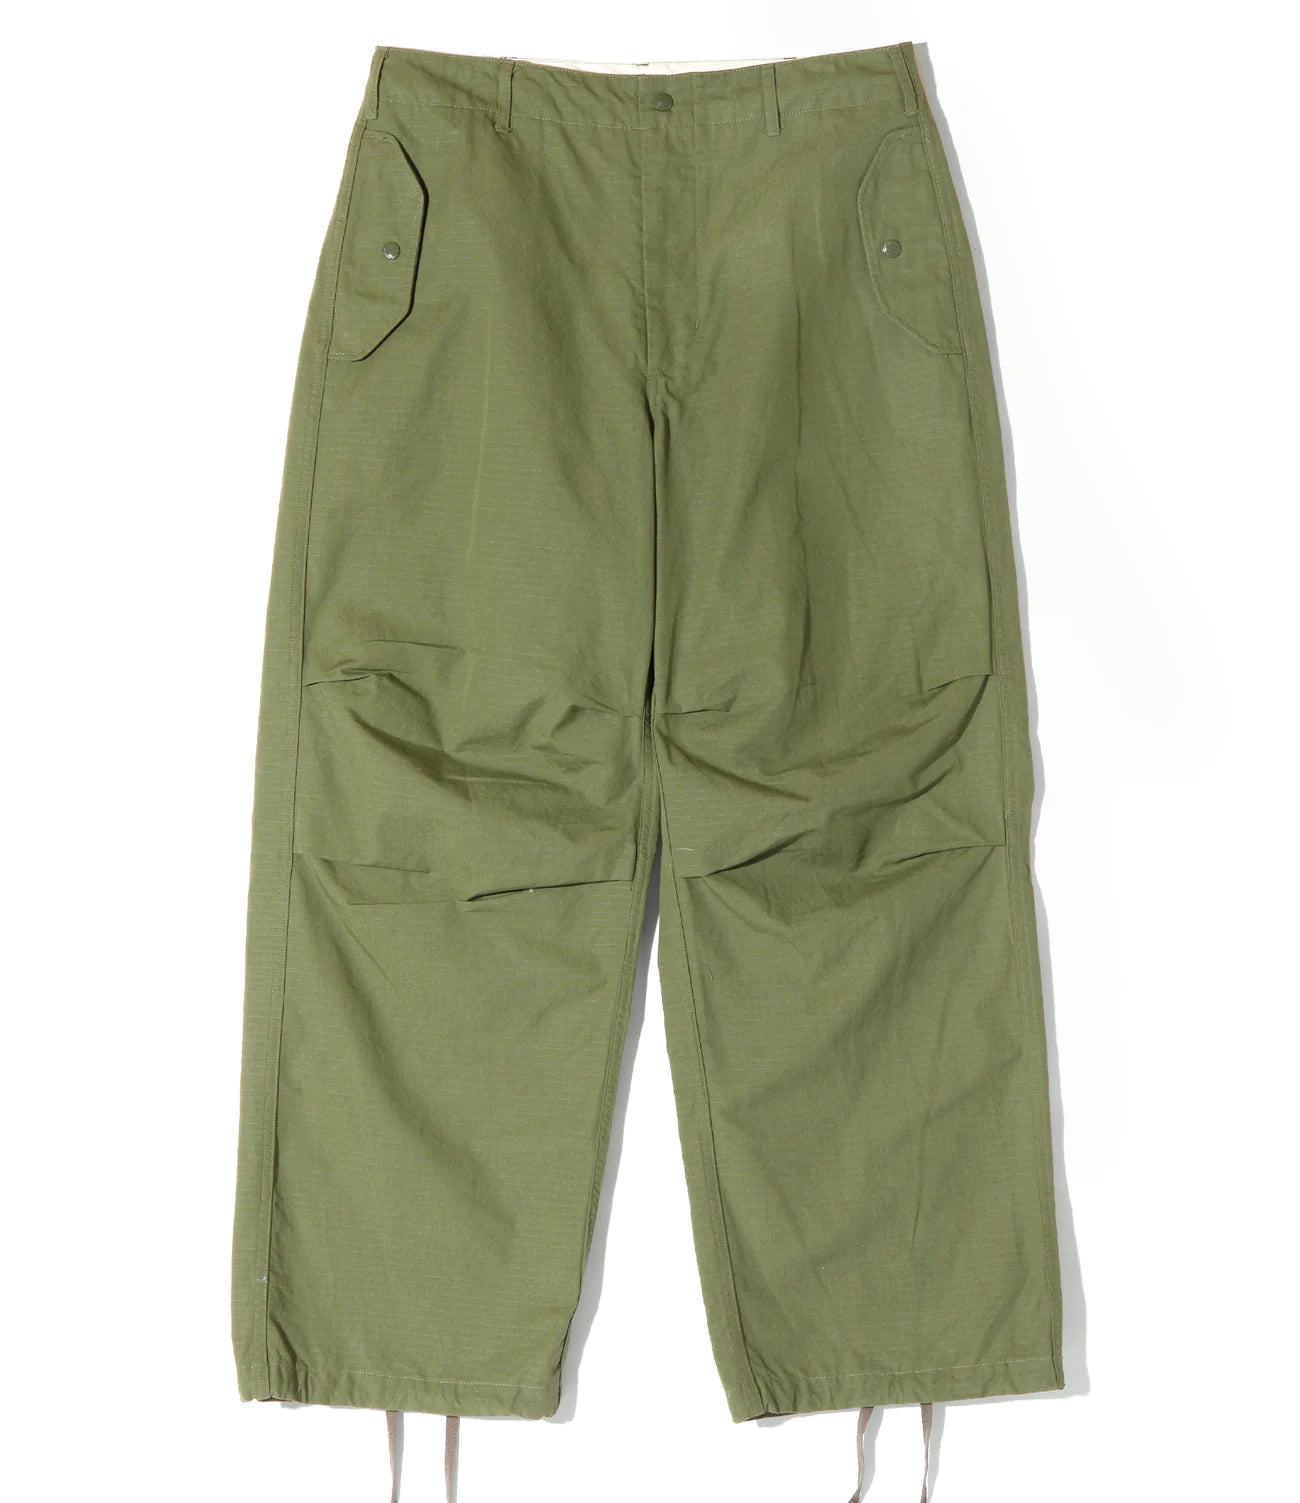 ENGINEERED GARMENTS OVER PANT - COTTON RIPSTOP